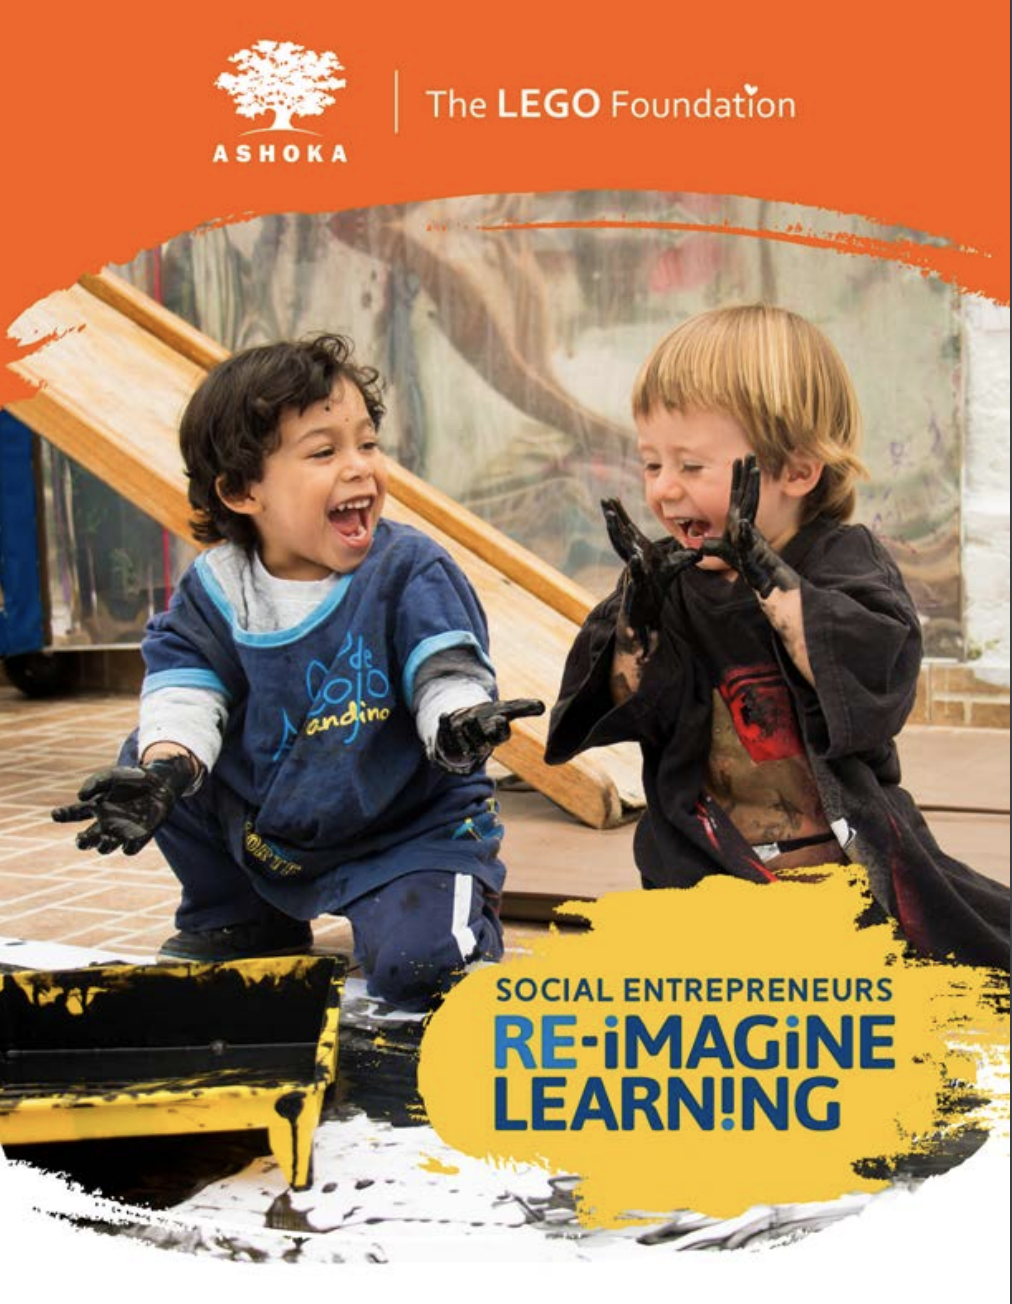 Cover for the Re-Imagine Learning Report by the Lego Foundation and Ashoka. Photo of two young kids smiling with mouths open wide; Ashoka and Lego Foundation logos at the top. "Social Entrepreneurs Re-Imagine Learning" in lettering in the lower right hand corner